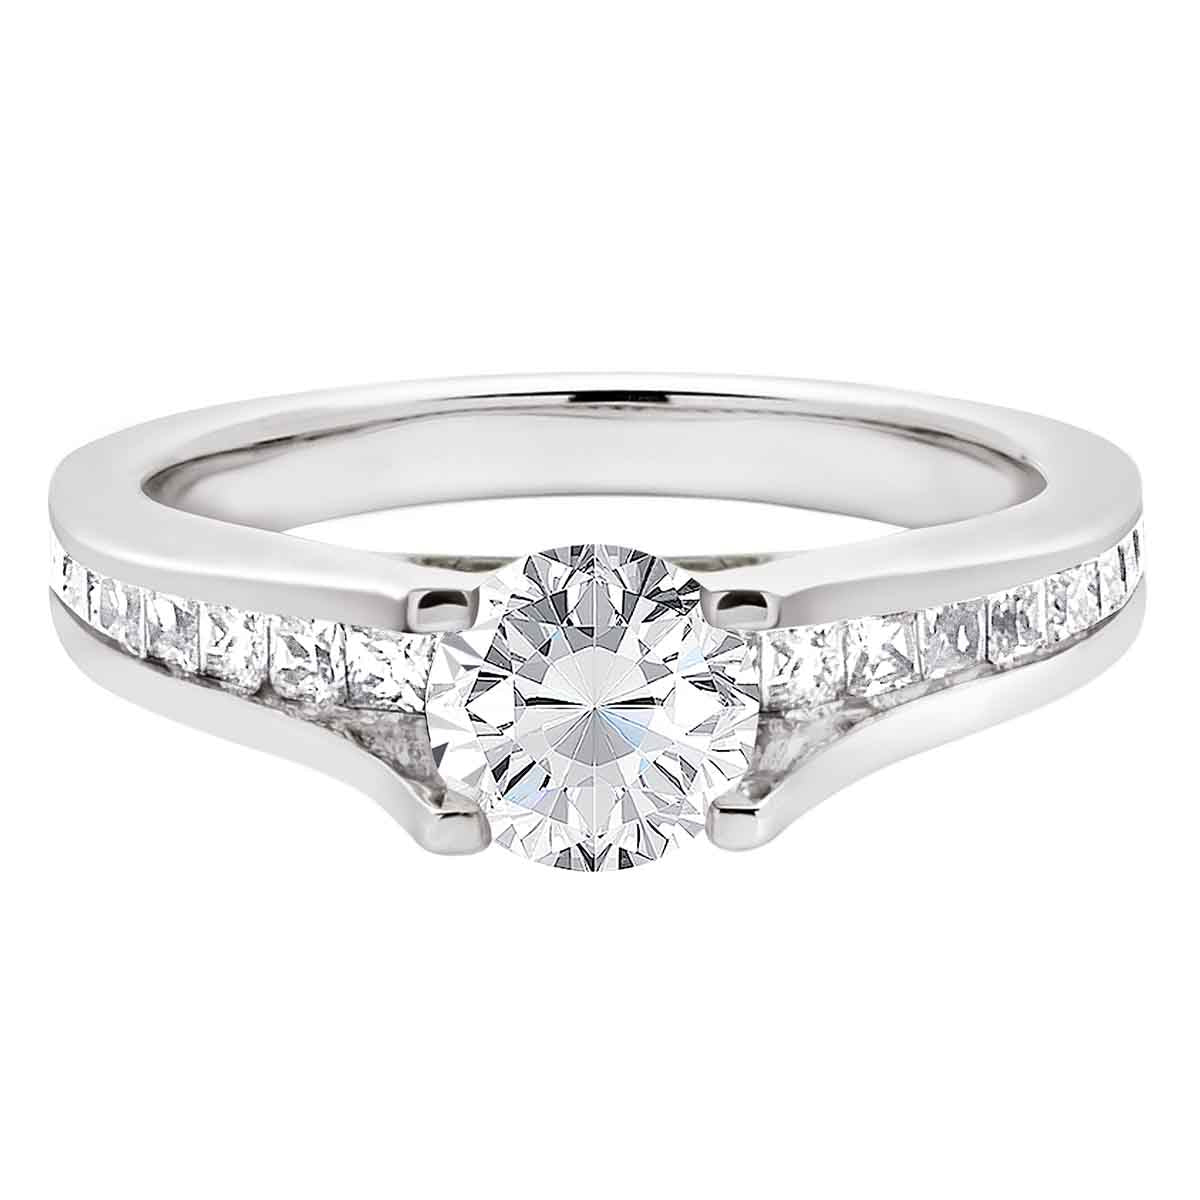 Channel Set Diamond Ring set in white gold